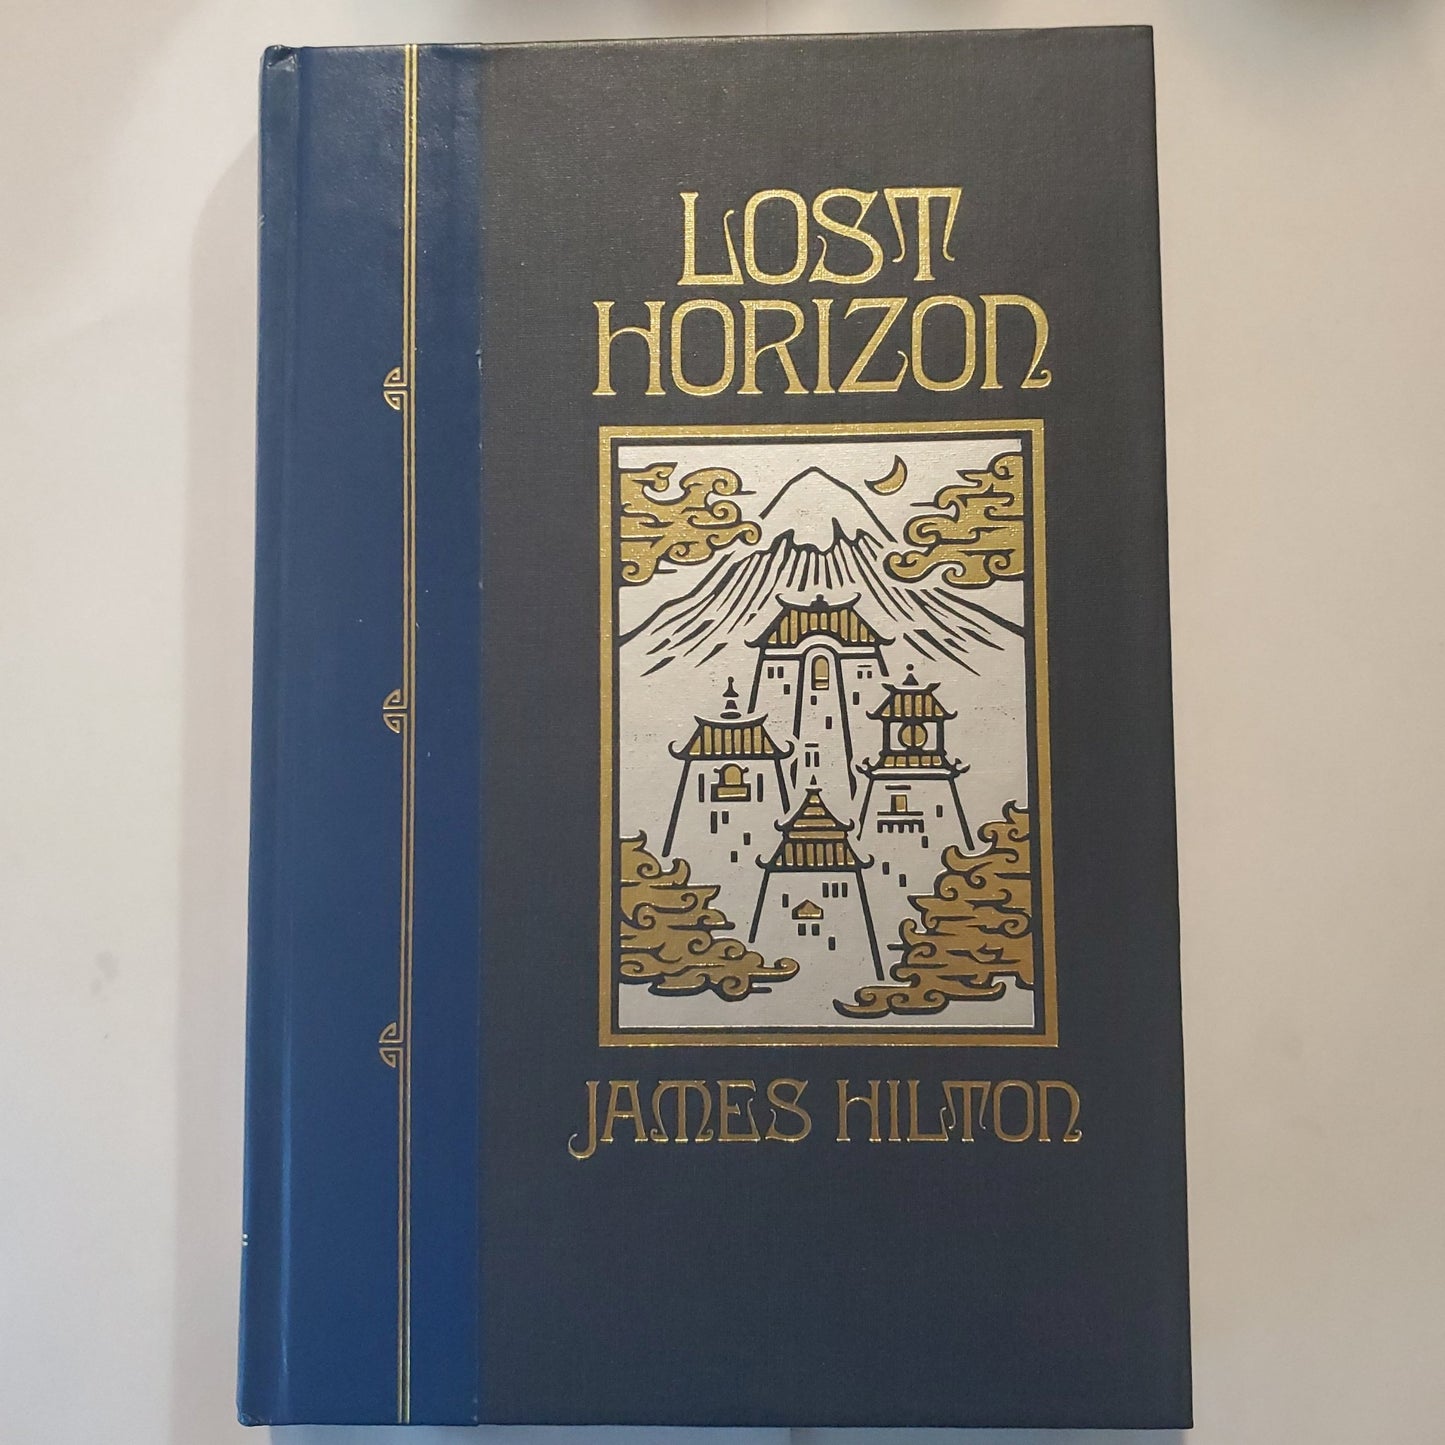 Lost Horizon - [ash-ling] Booksellers